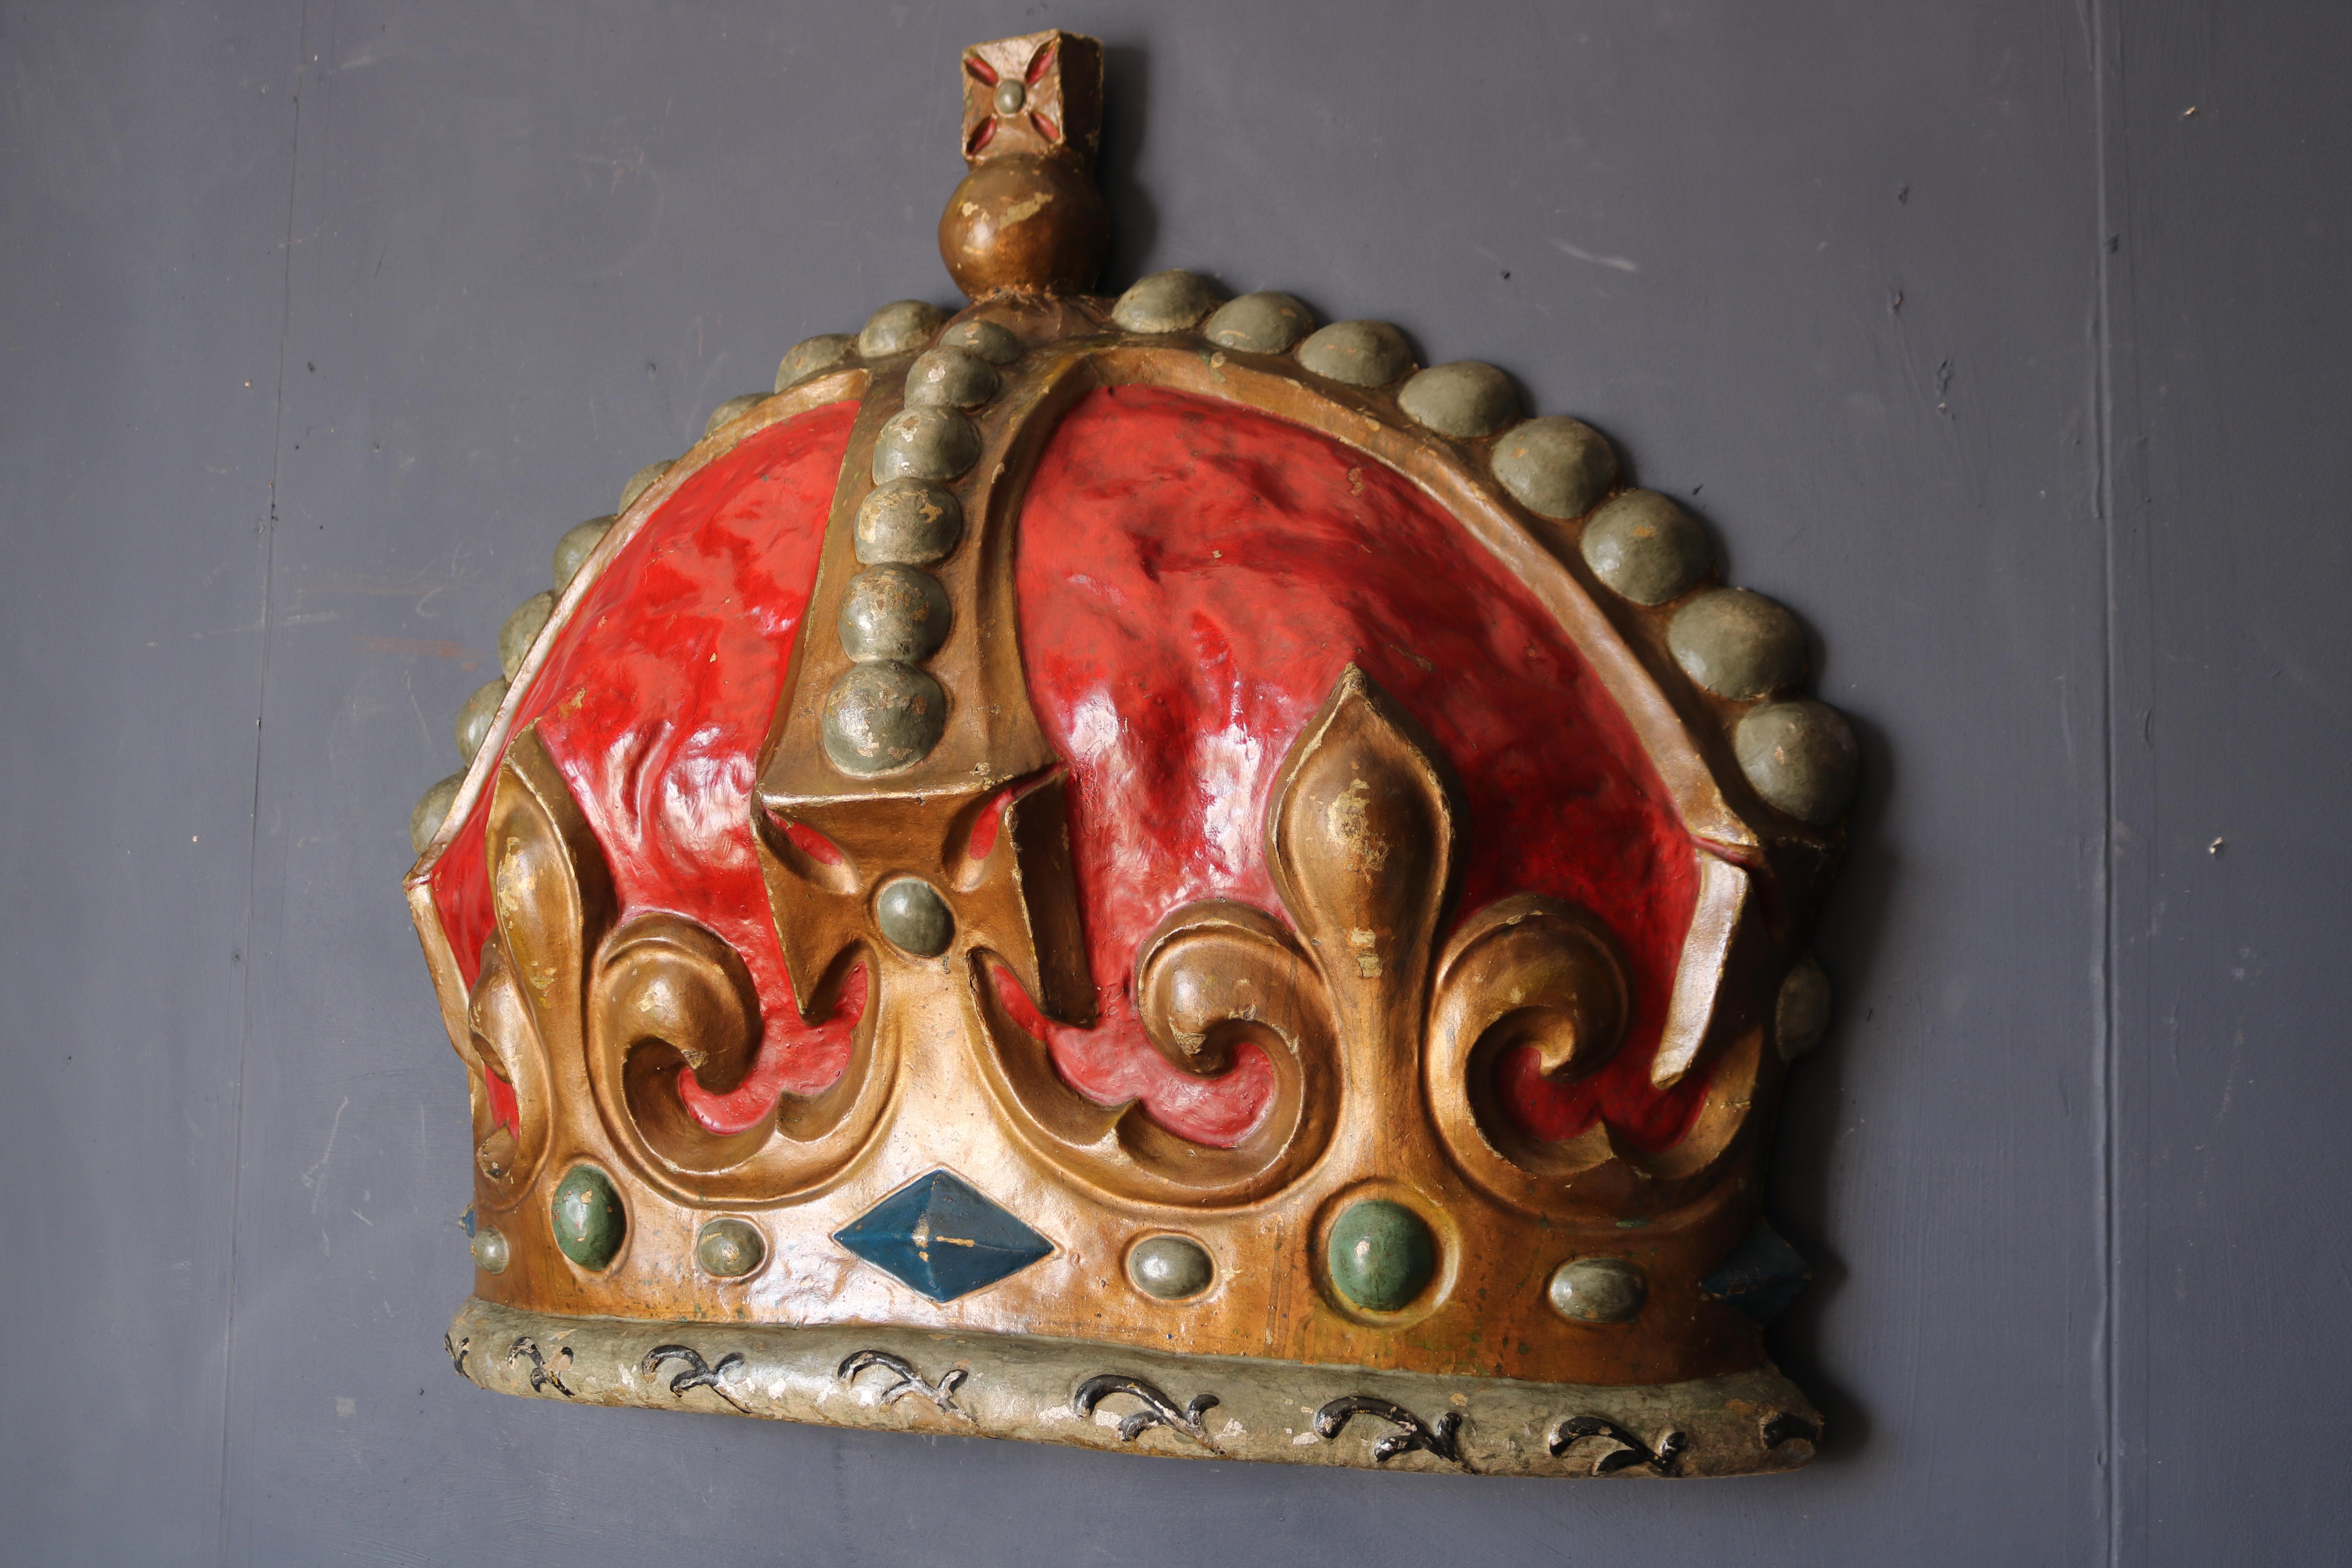 Edwardian Large Papier Mâché Crown from the Coronation of King George VI and Elizabeth